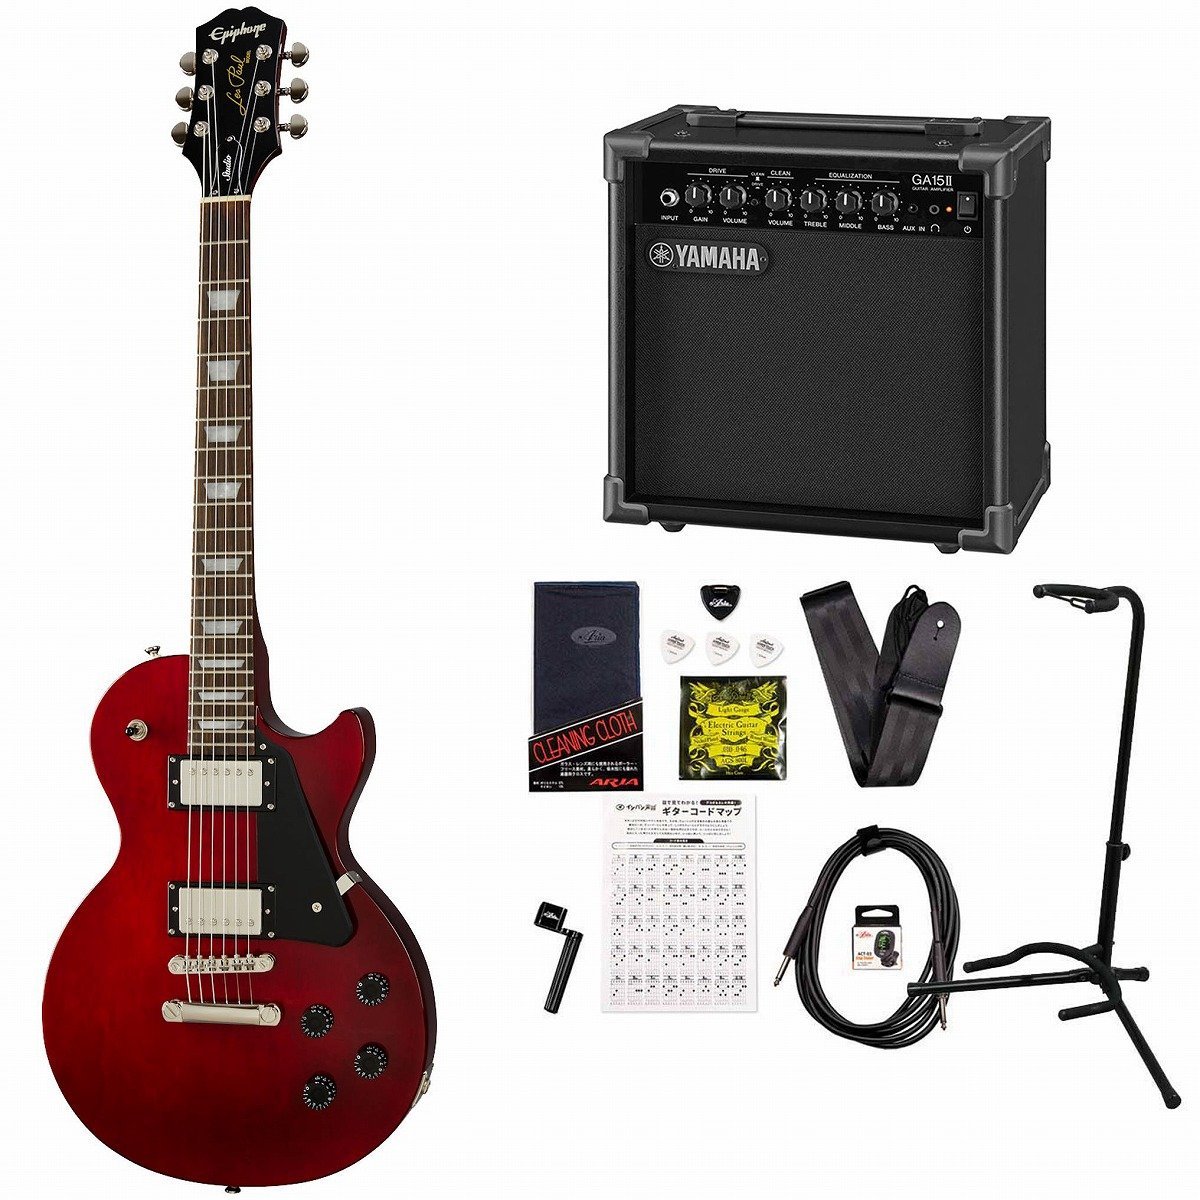 Epiphone Epiphone / Inspired by Gibson Les Paul Studio Wine Red